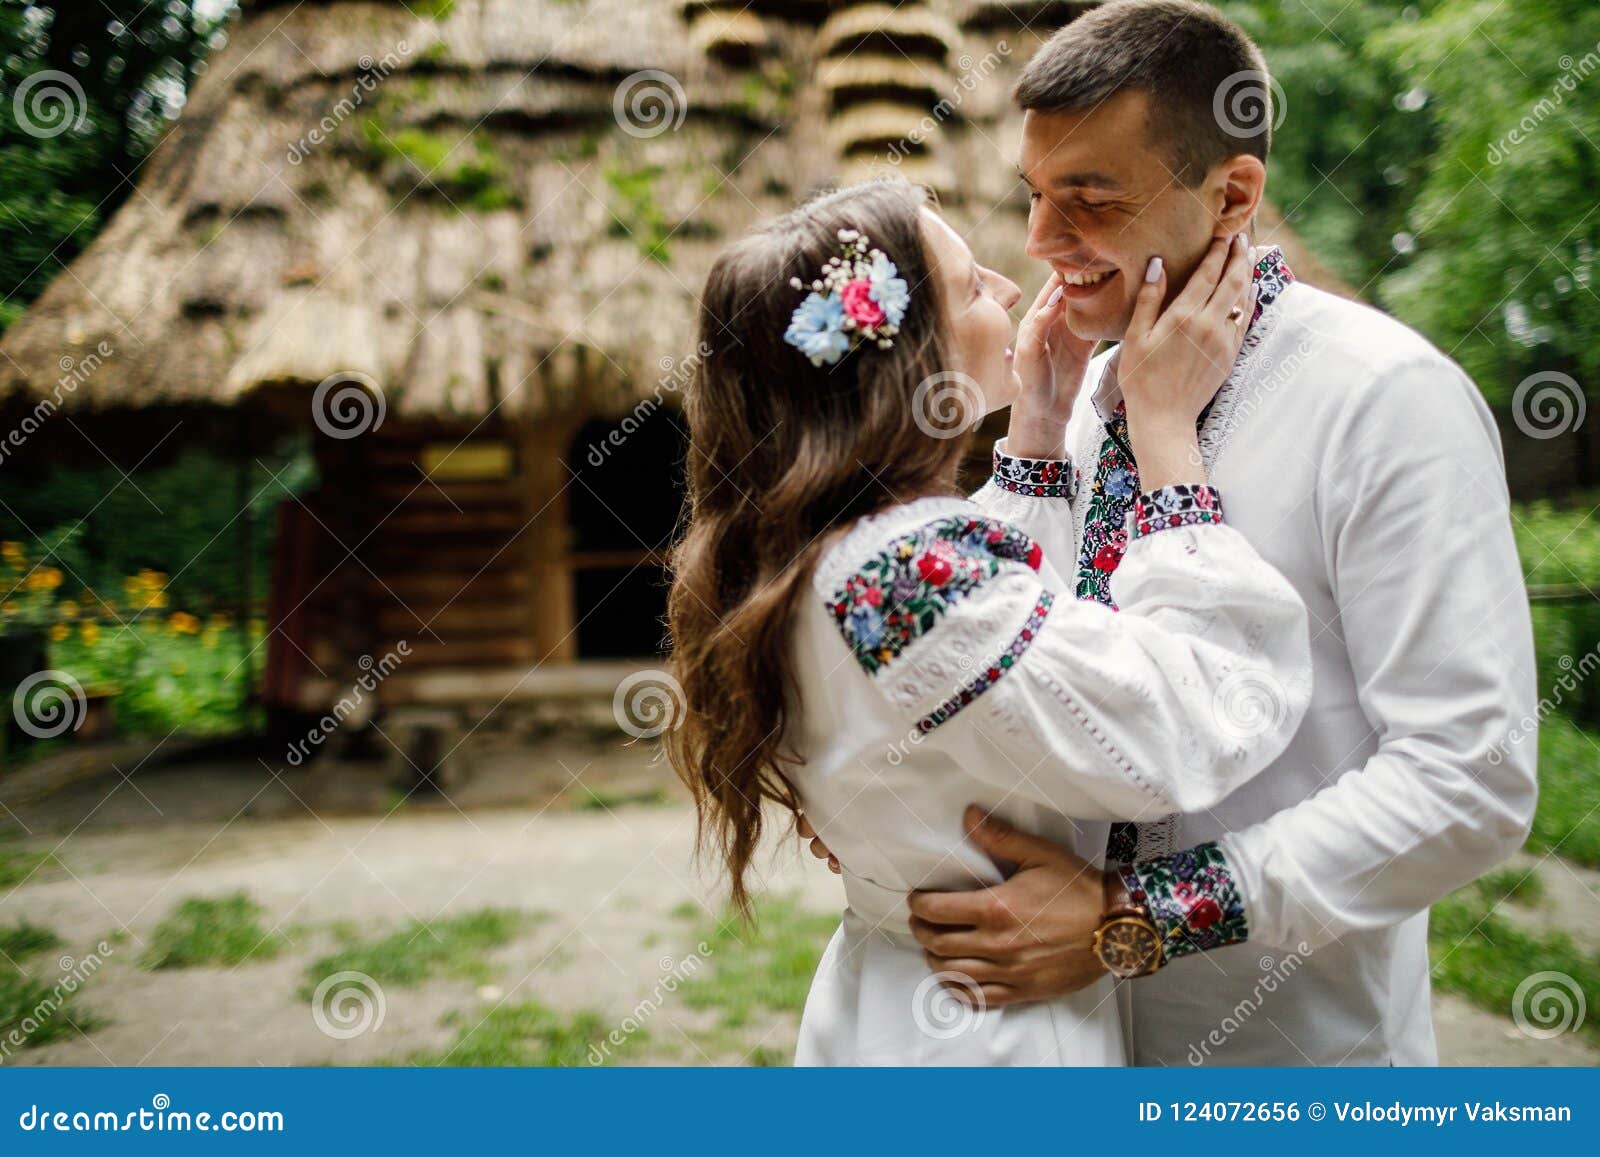 https://thumbs.dreamstime.com/z/beautiful-bride-groom-ukrainian-style-standing-w-lovely-couple-national-costumes-outdoors-ethnic-wedding-marriage-124072656.jpg